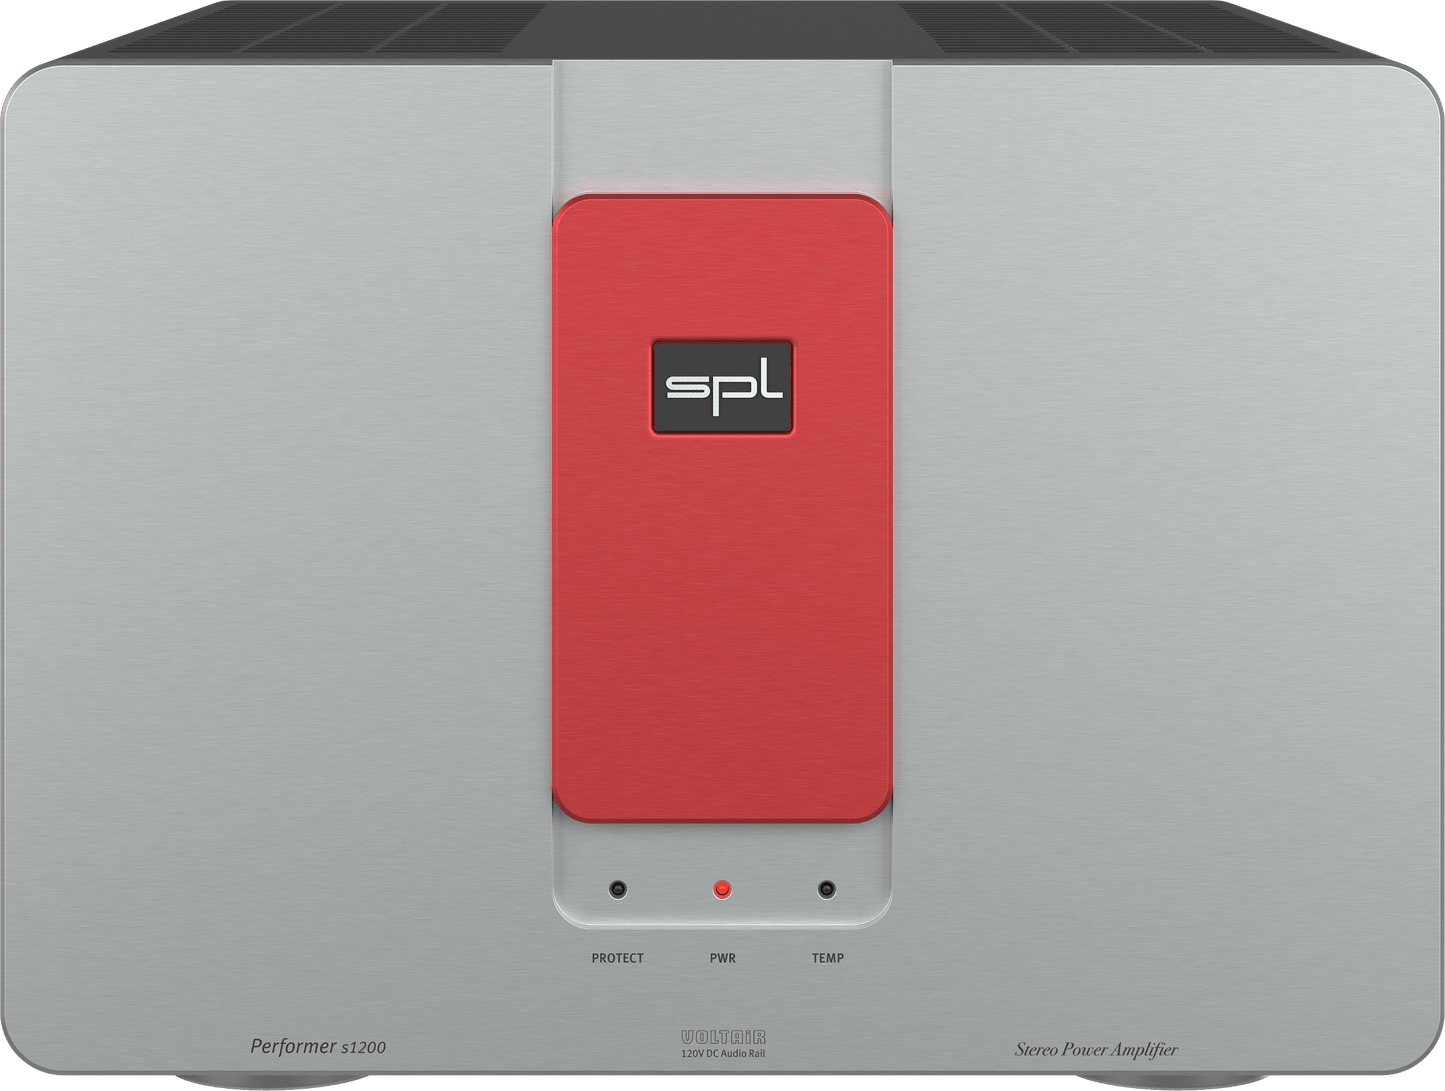 SPL Audio Performer s1200 Stereo Power Amplifier in silver with red insert